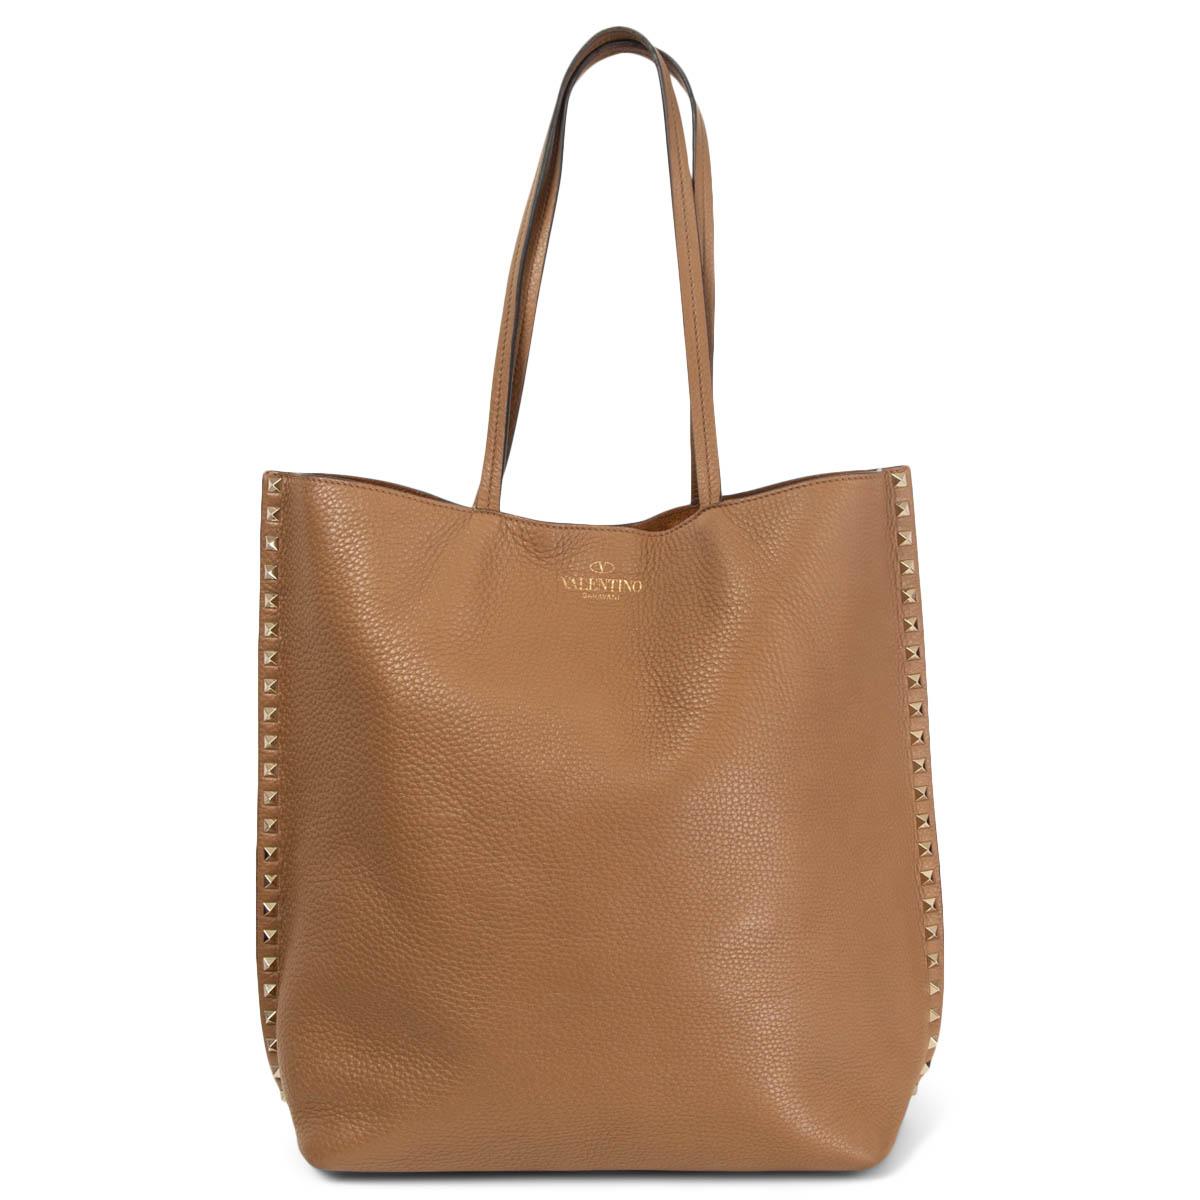 VALENTINO camel brown grainy leather ROCKSTUD Tote Bag